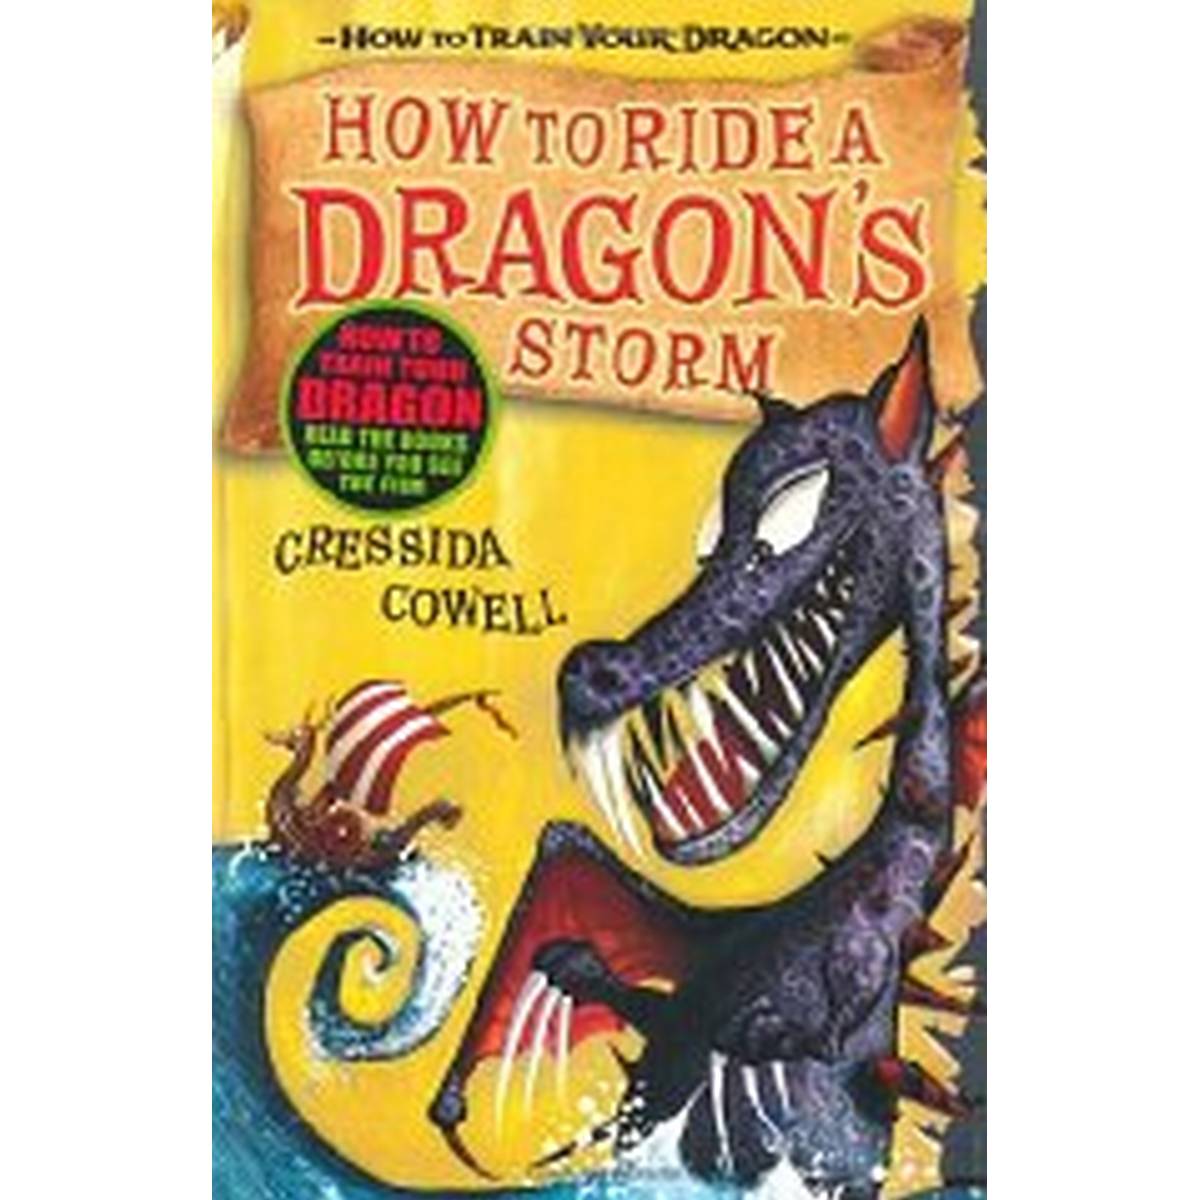 How to Ride a Dragon's Storm (How to train your Dragon)